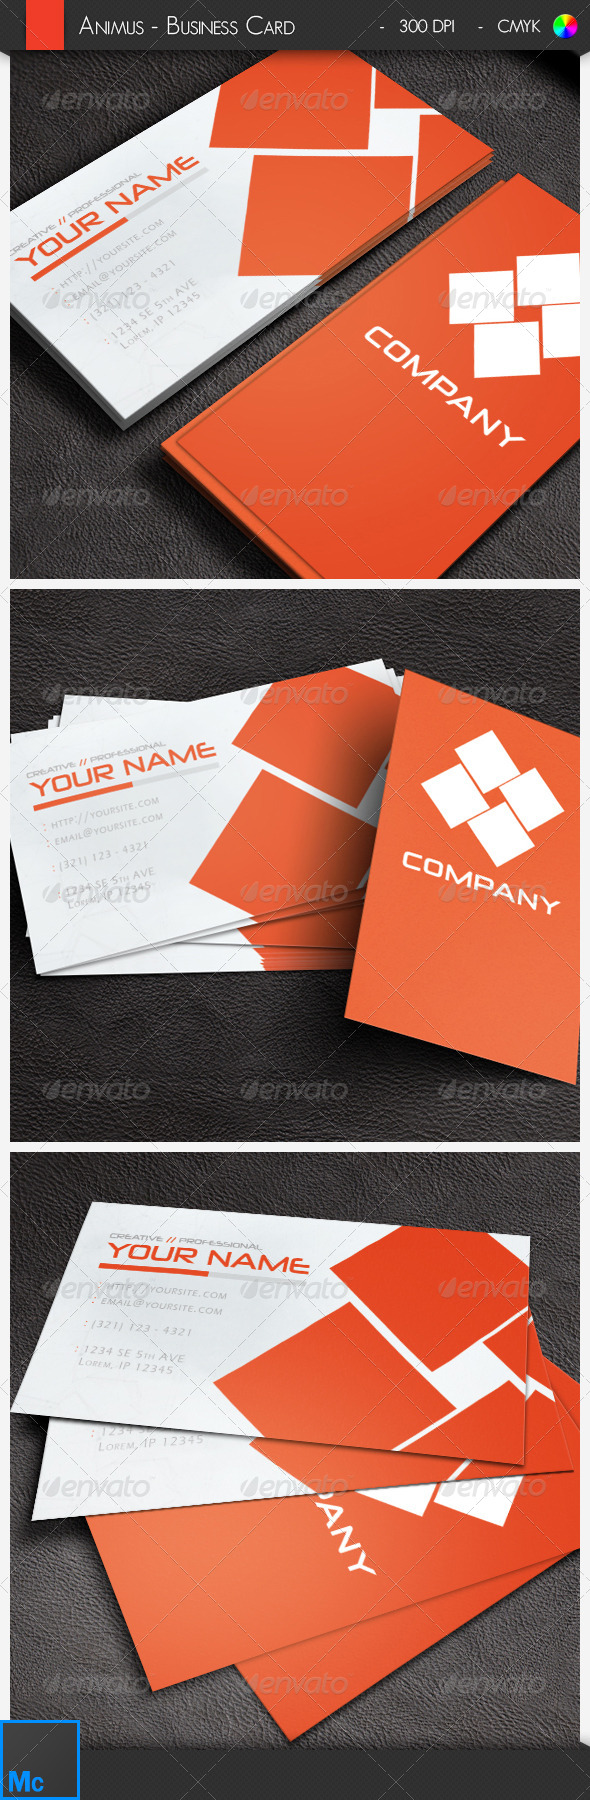 White and Red - Business Card (Creative)